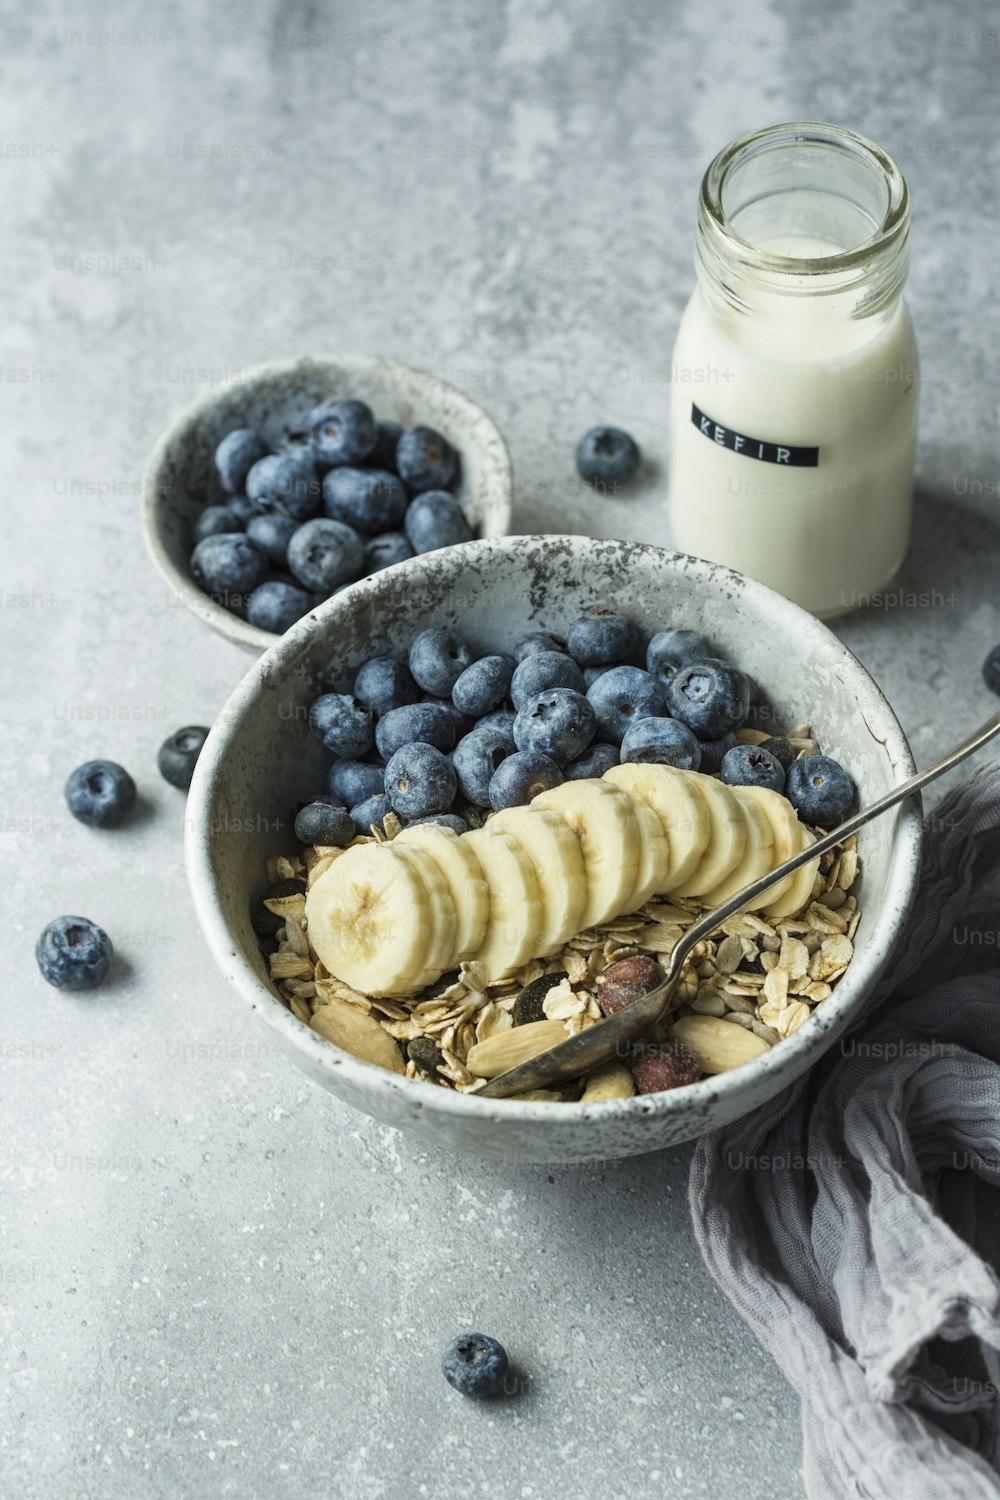 a bowl of cereal with bananas and blueberries next to a glass of milk